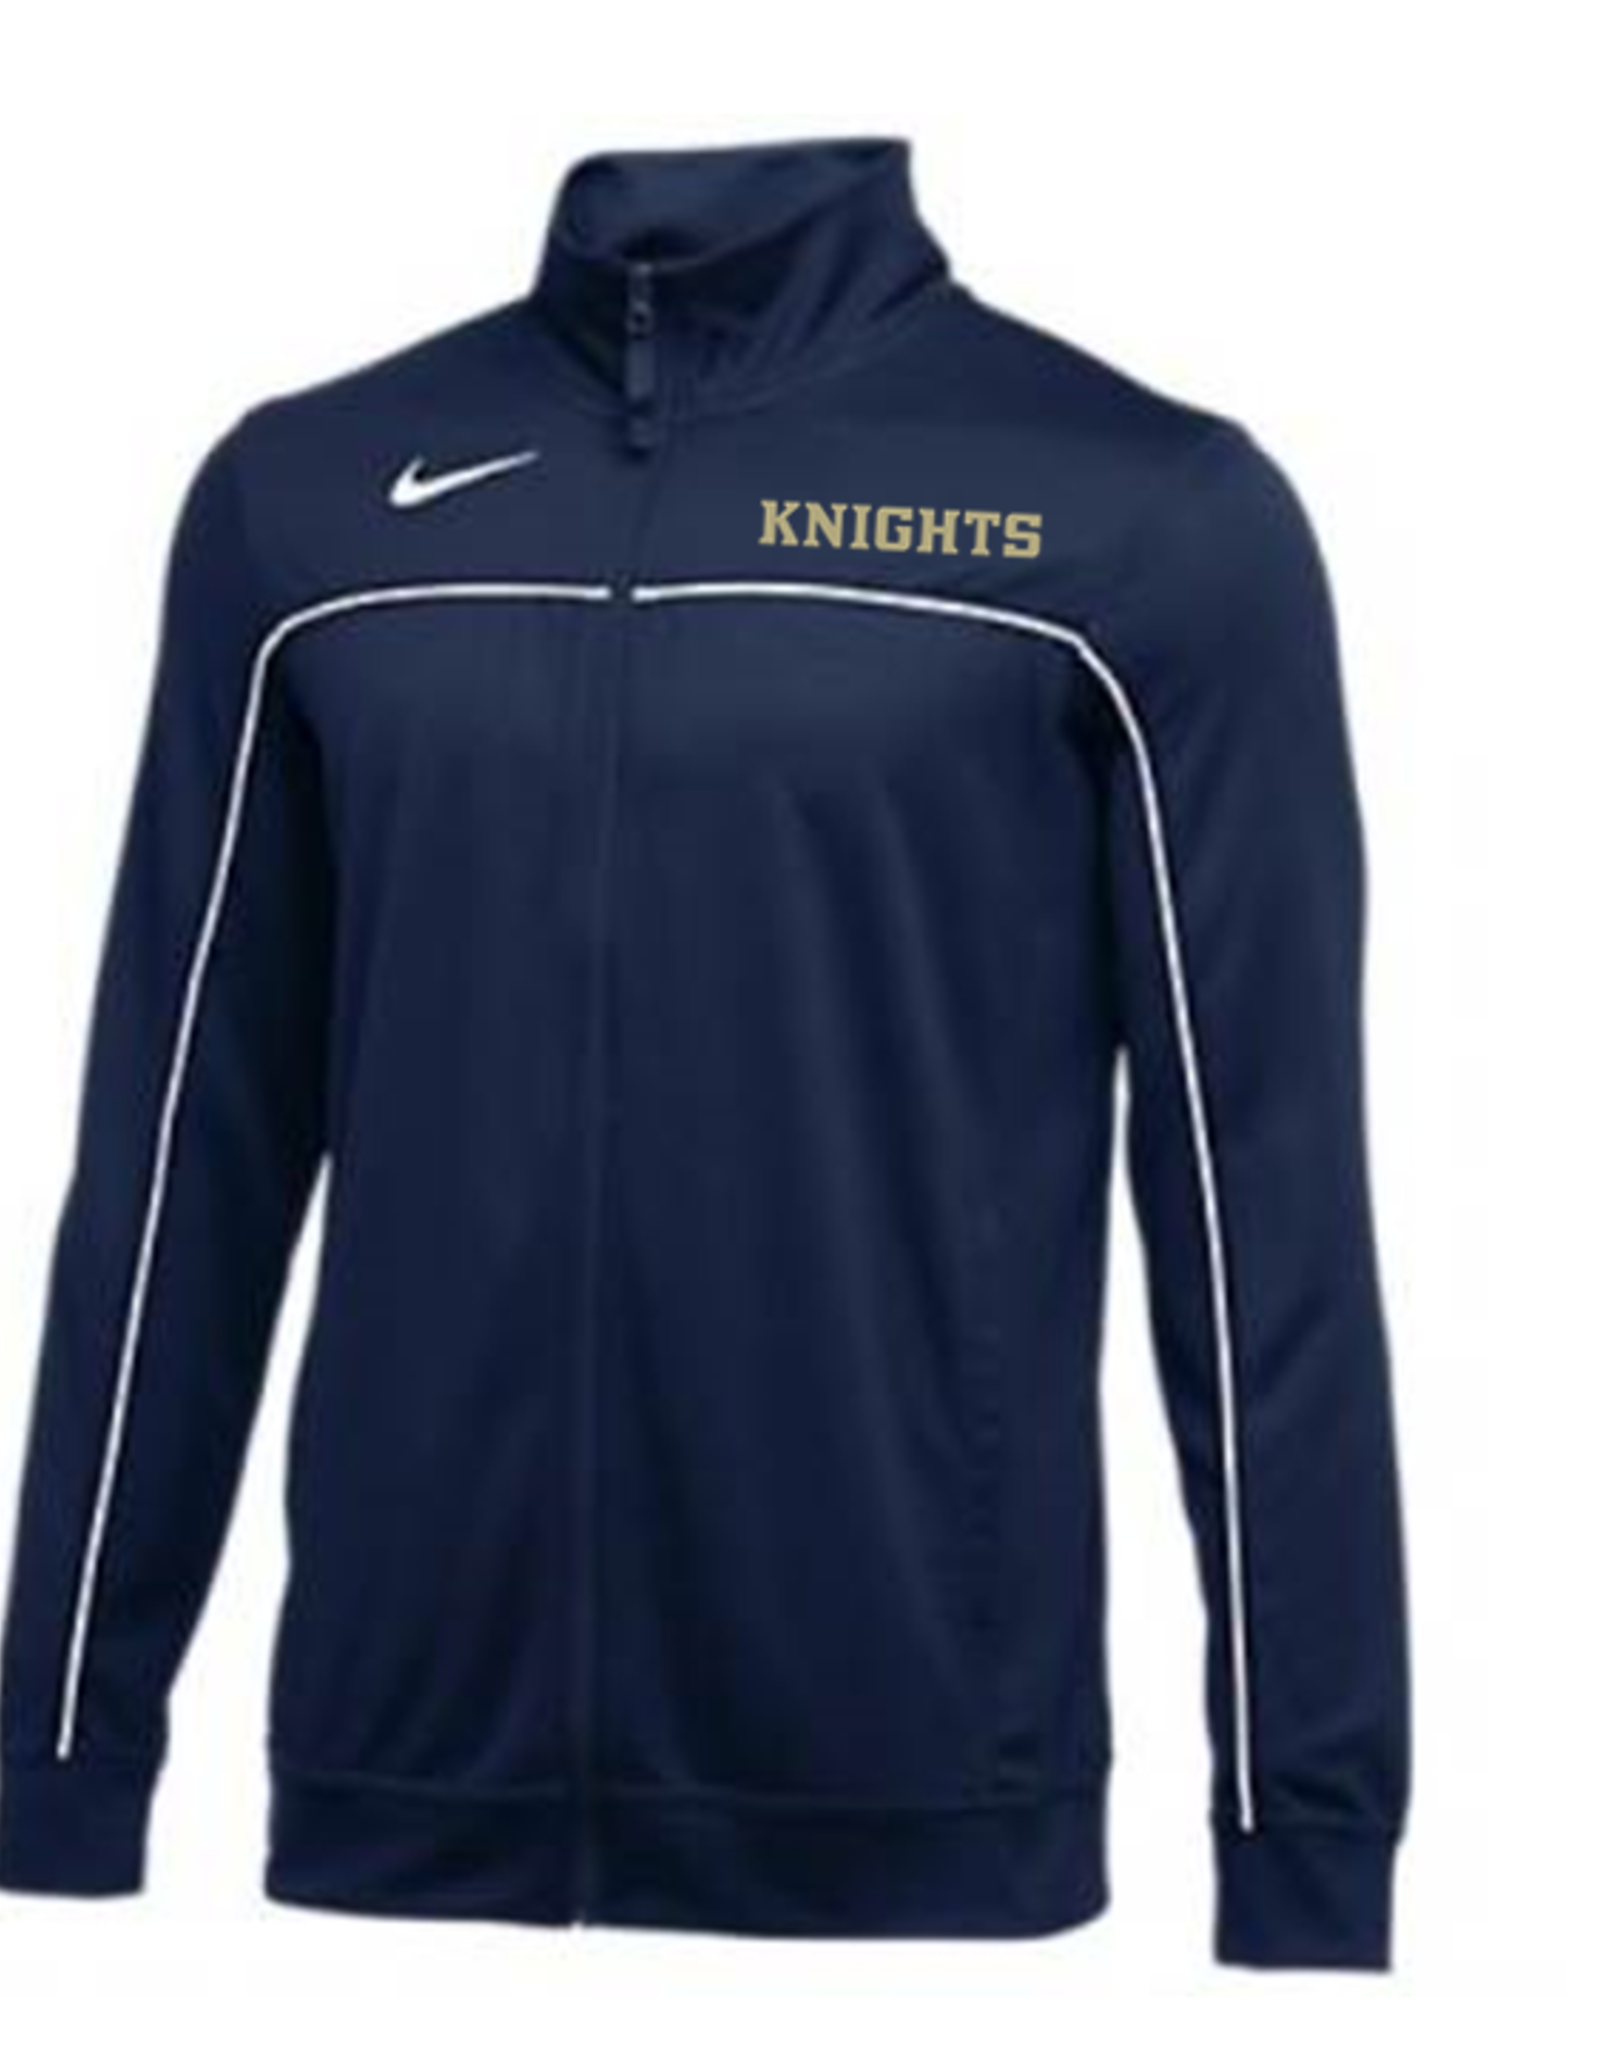 Nike Mens Navy Nike Rivalry Jacket with Gold KNIGHTS